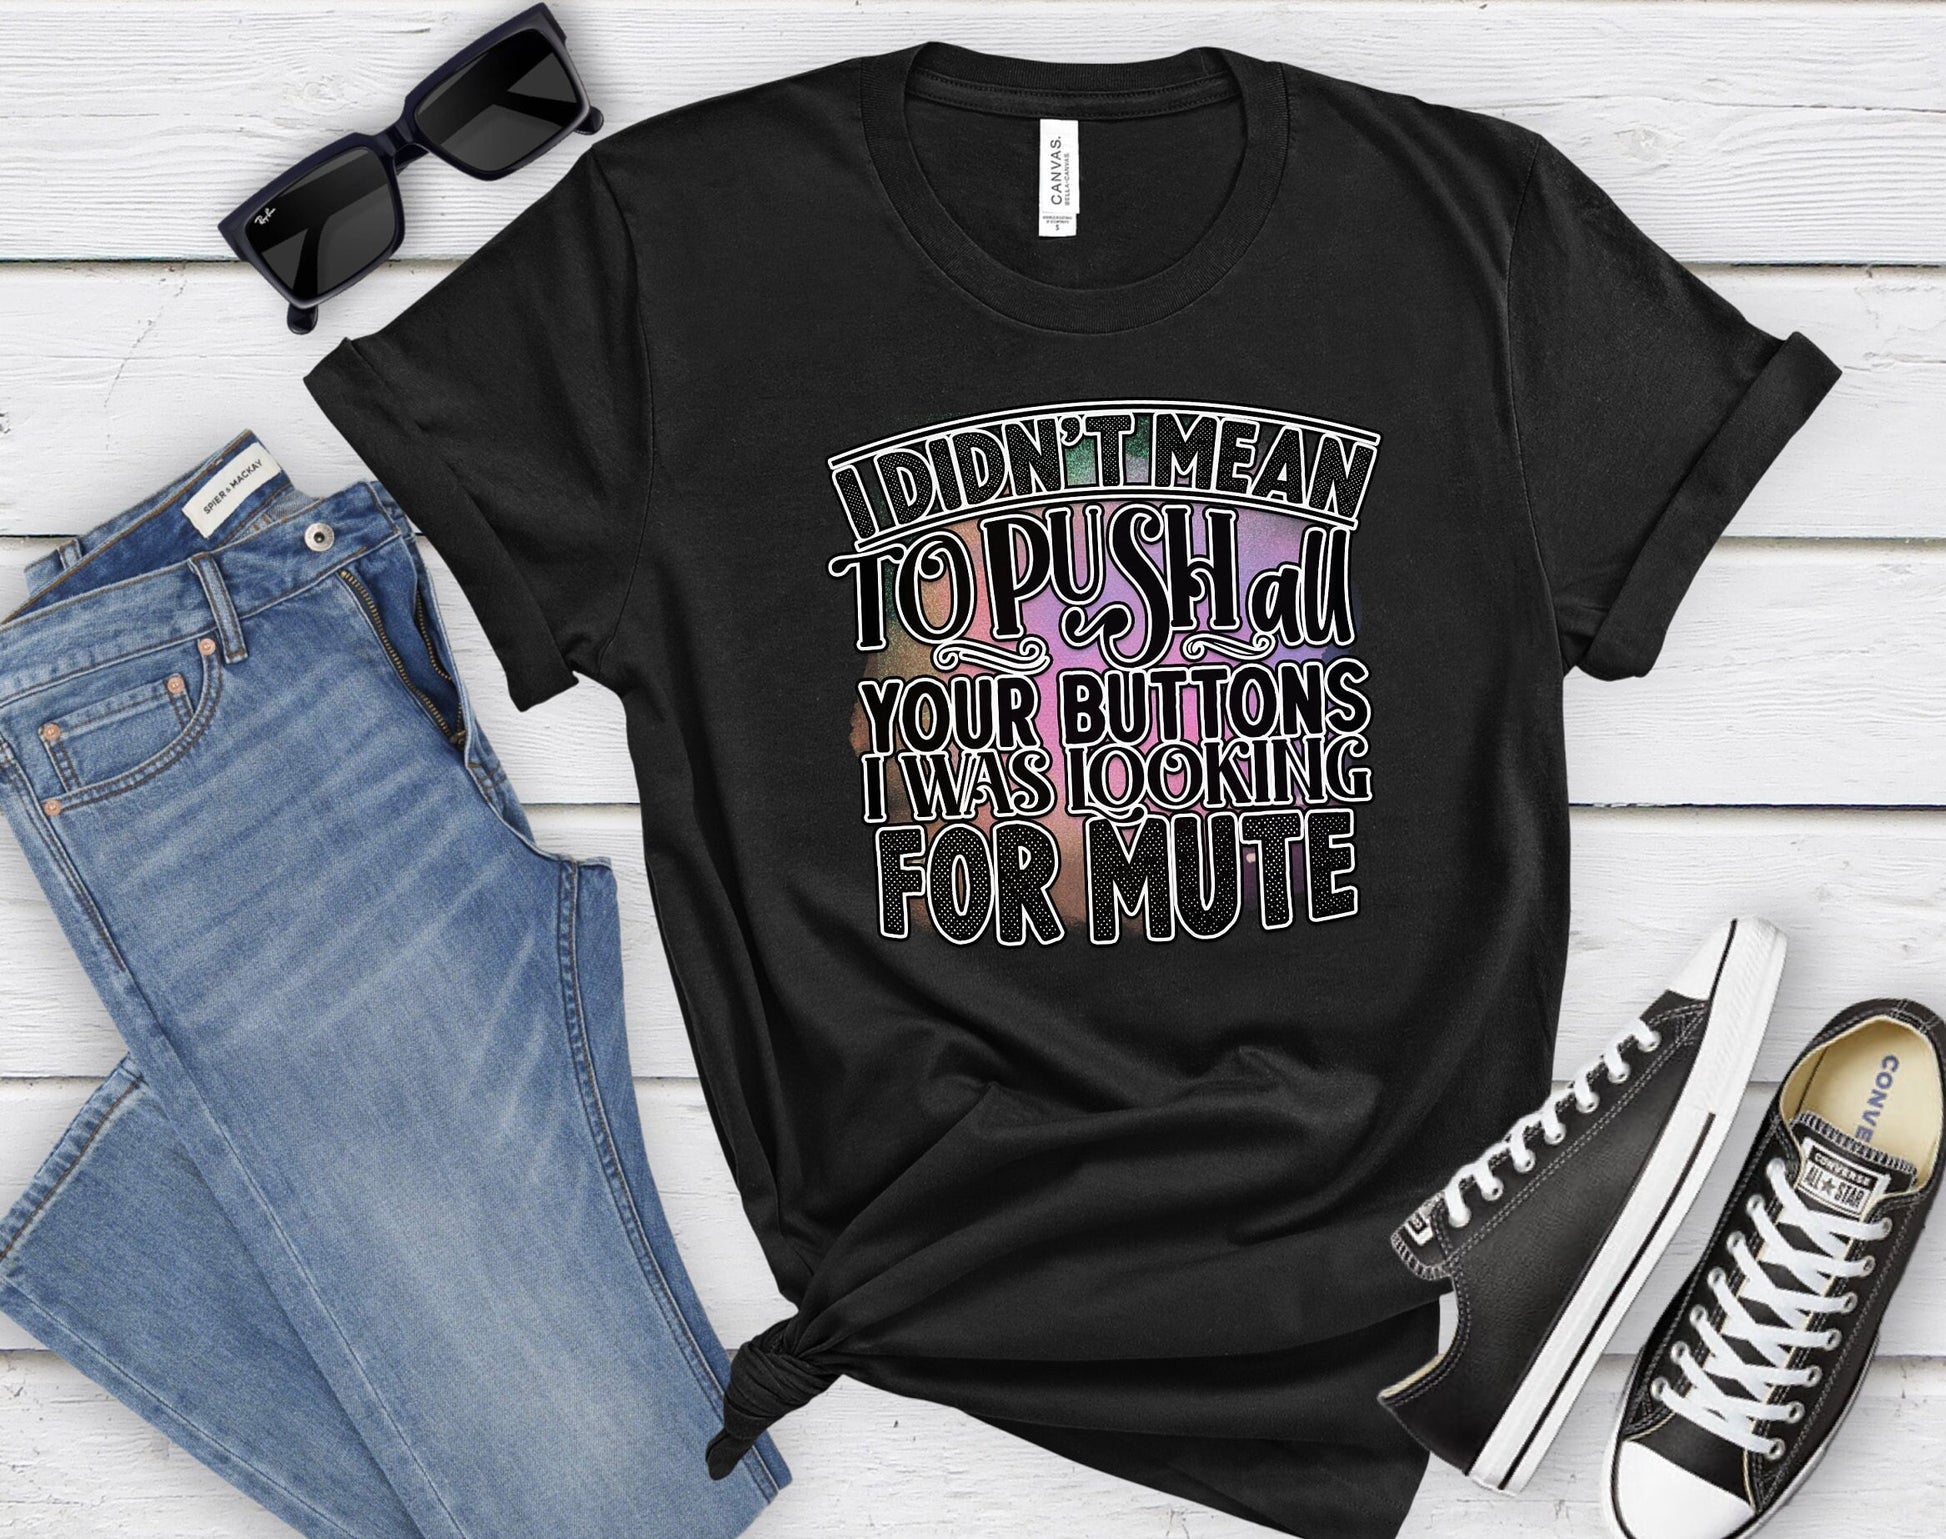 I Didnt mean to push all your buttons I was looking for mute shirt by Scorpion Tees.  This Funny Shirt is comfortable yet Stylish enough to go with anything in your wardrobe. Great Shirt to turn heads and bring smiles.
www.scorpiontees.etsy.com